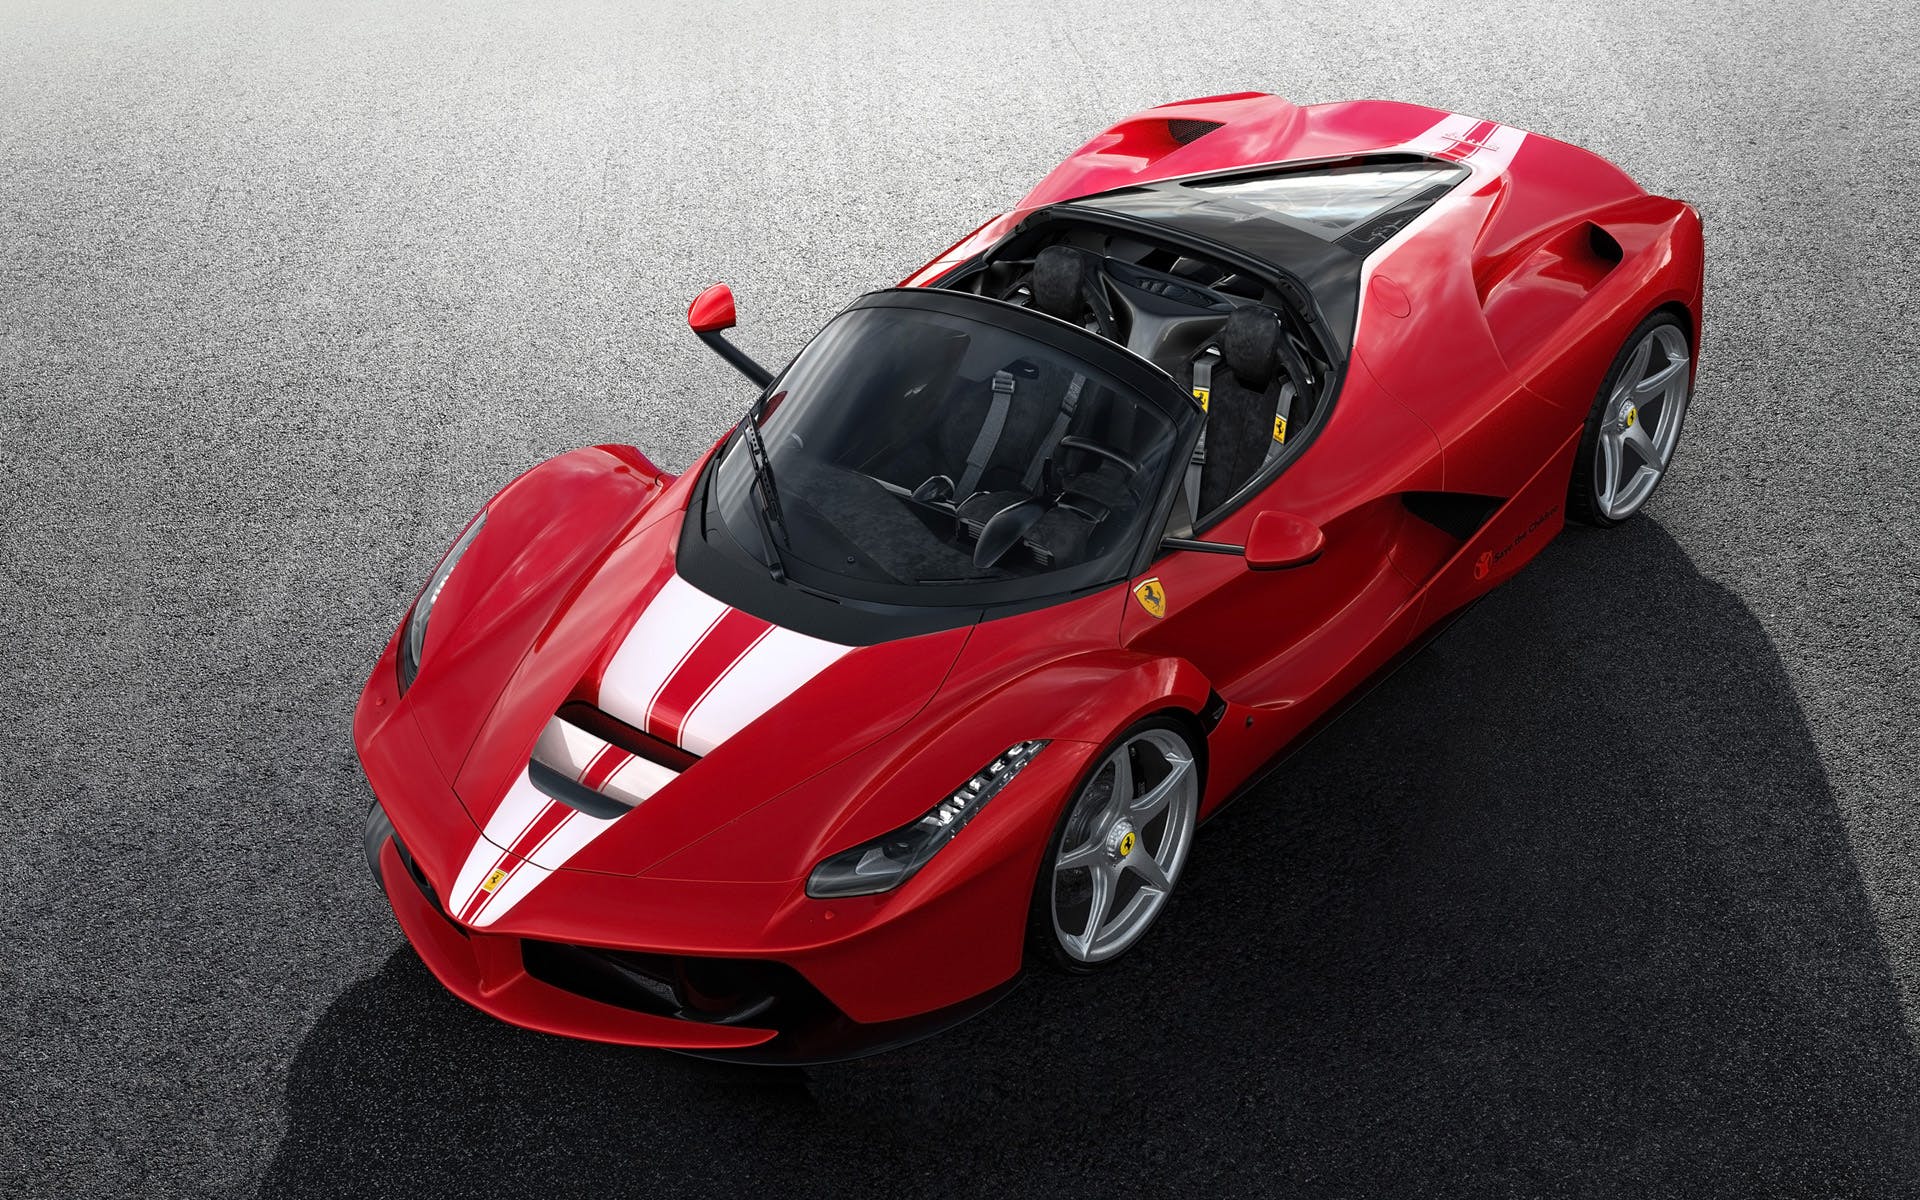 Cool Details About The New 986 HP Hybrid Ferrari SF90 Stradale